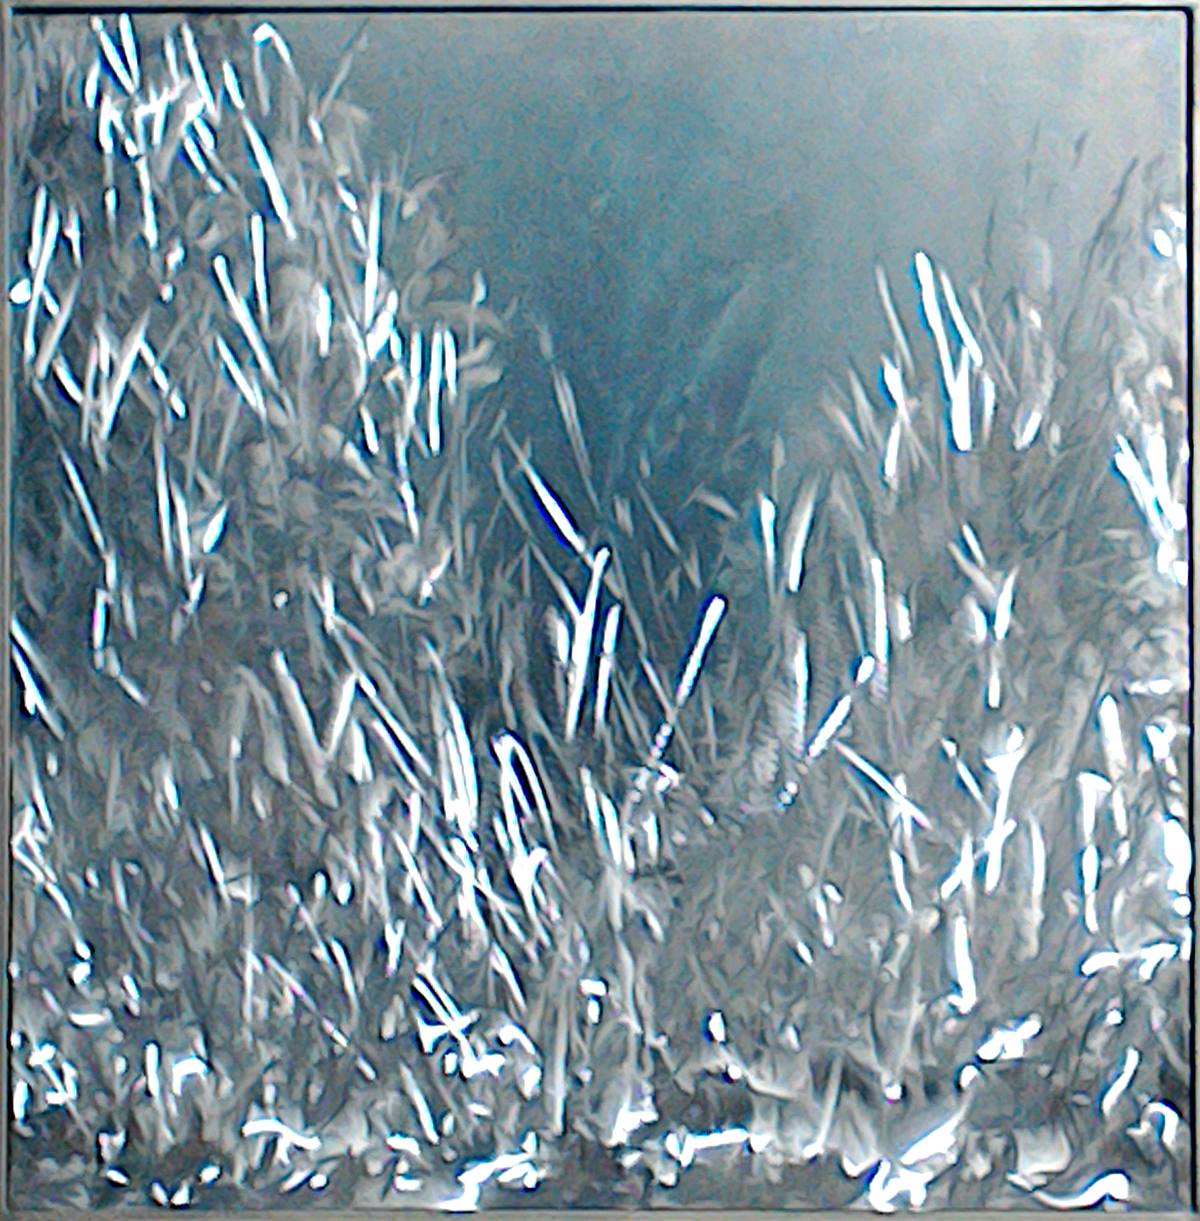 Winterscape: Abstract painting, mixed media on metal